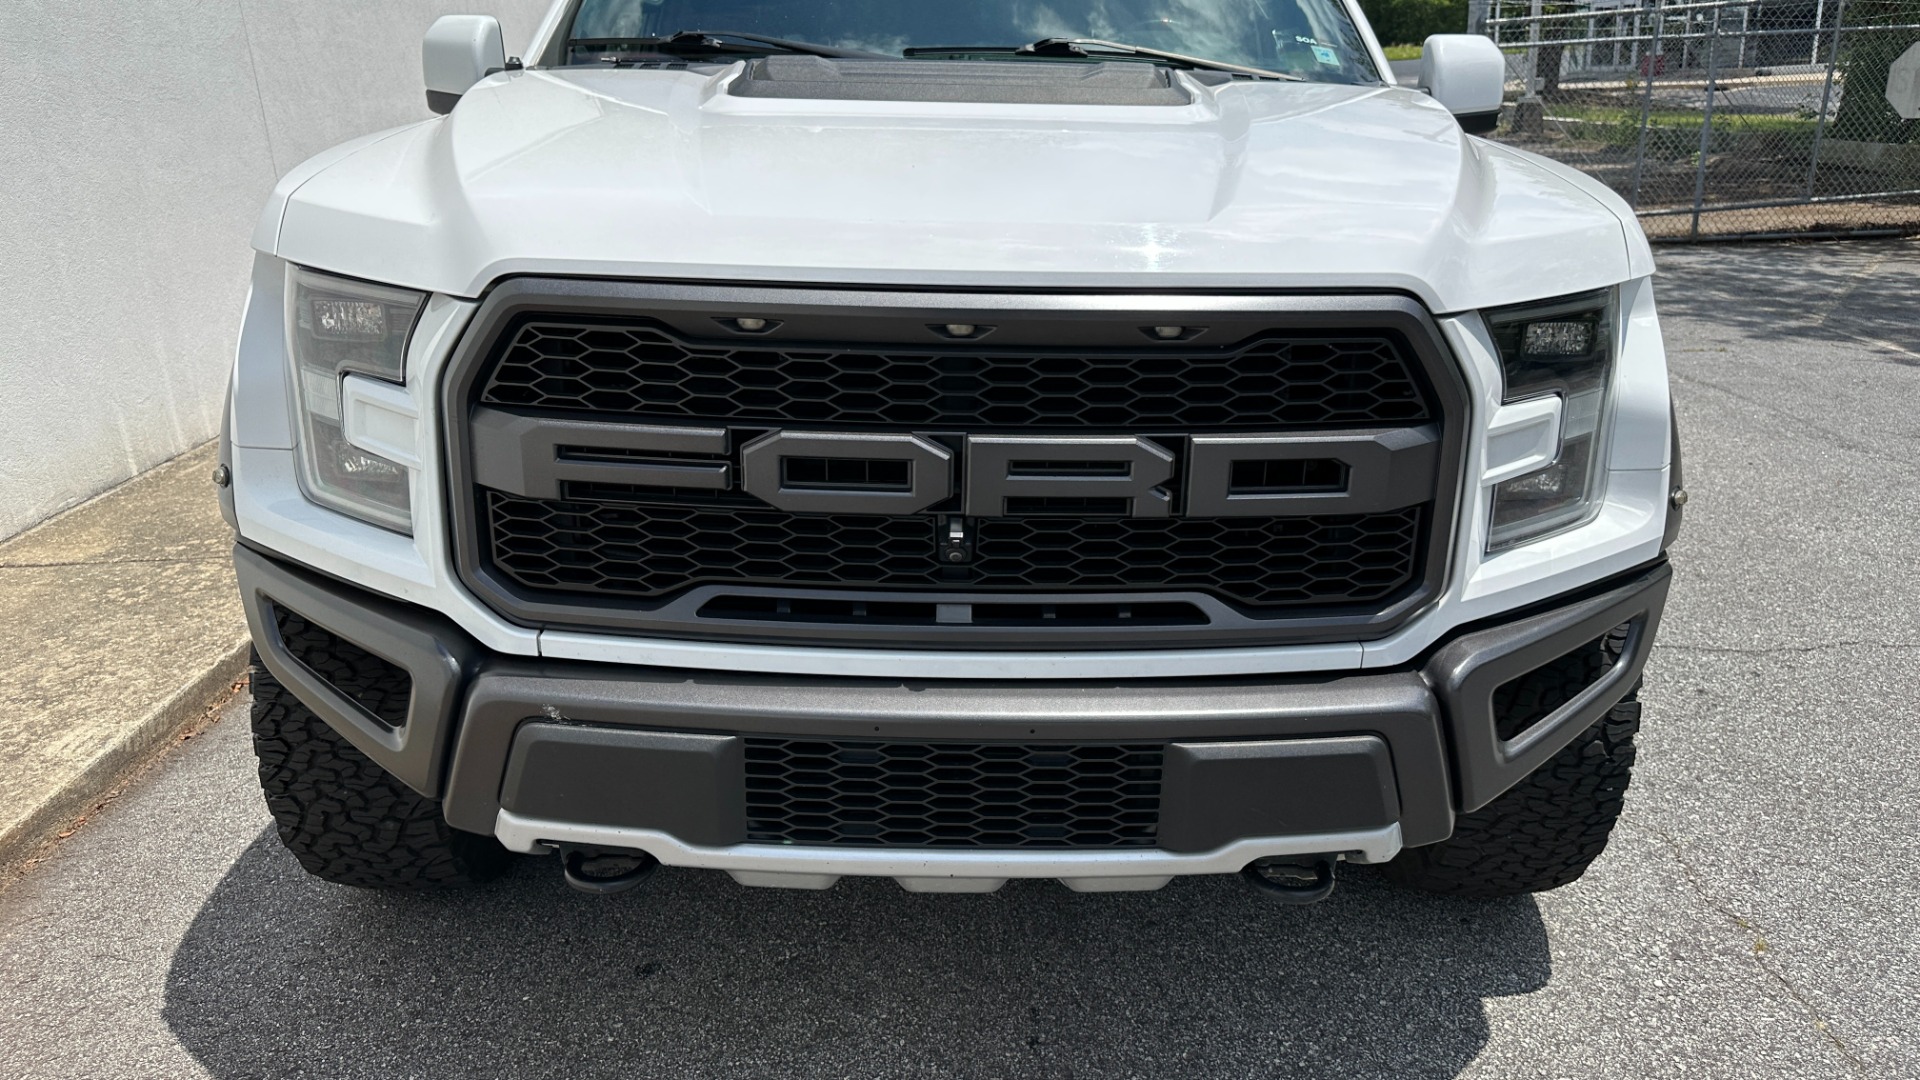 Used 2020 Ford F-150 RAPTOR / HIGH OUTPUT / PANORAMIC ROOF / 17IN FORGED WHEELS for sale $59,995 at Formula Imports in Charlotte NC 28227 8